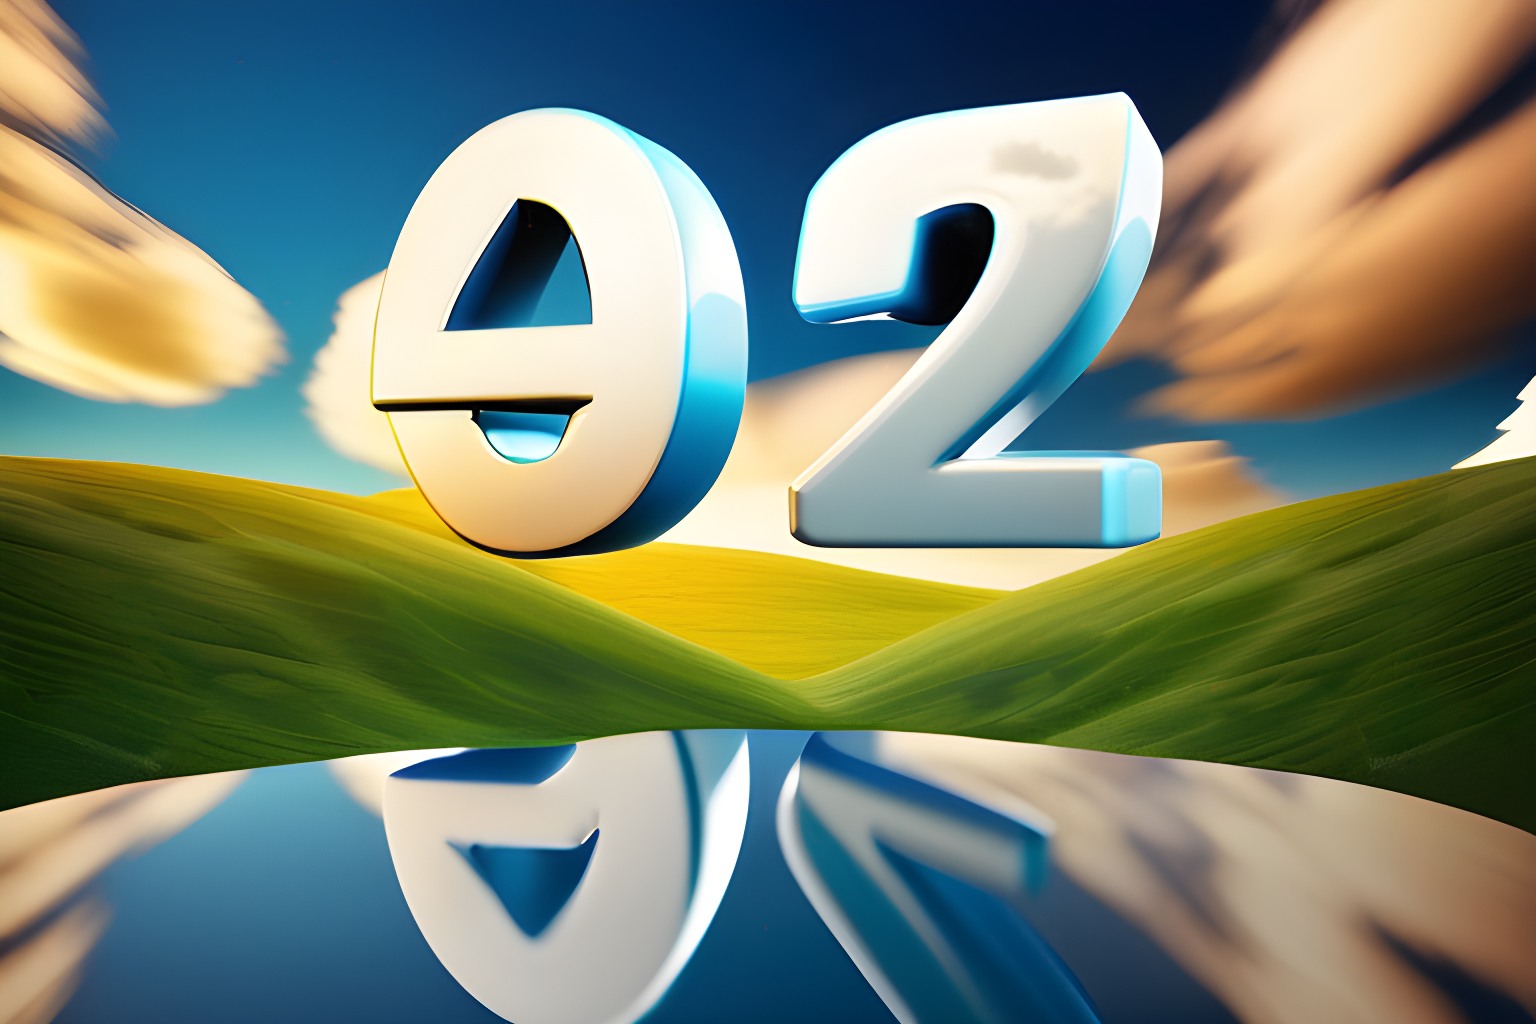 the mathematical equation '2   2 = 4' floating in mid air with clouds in the background